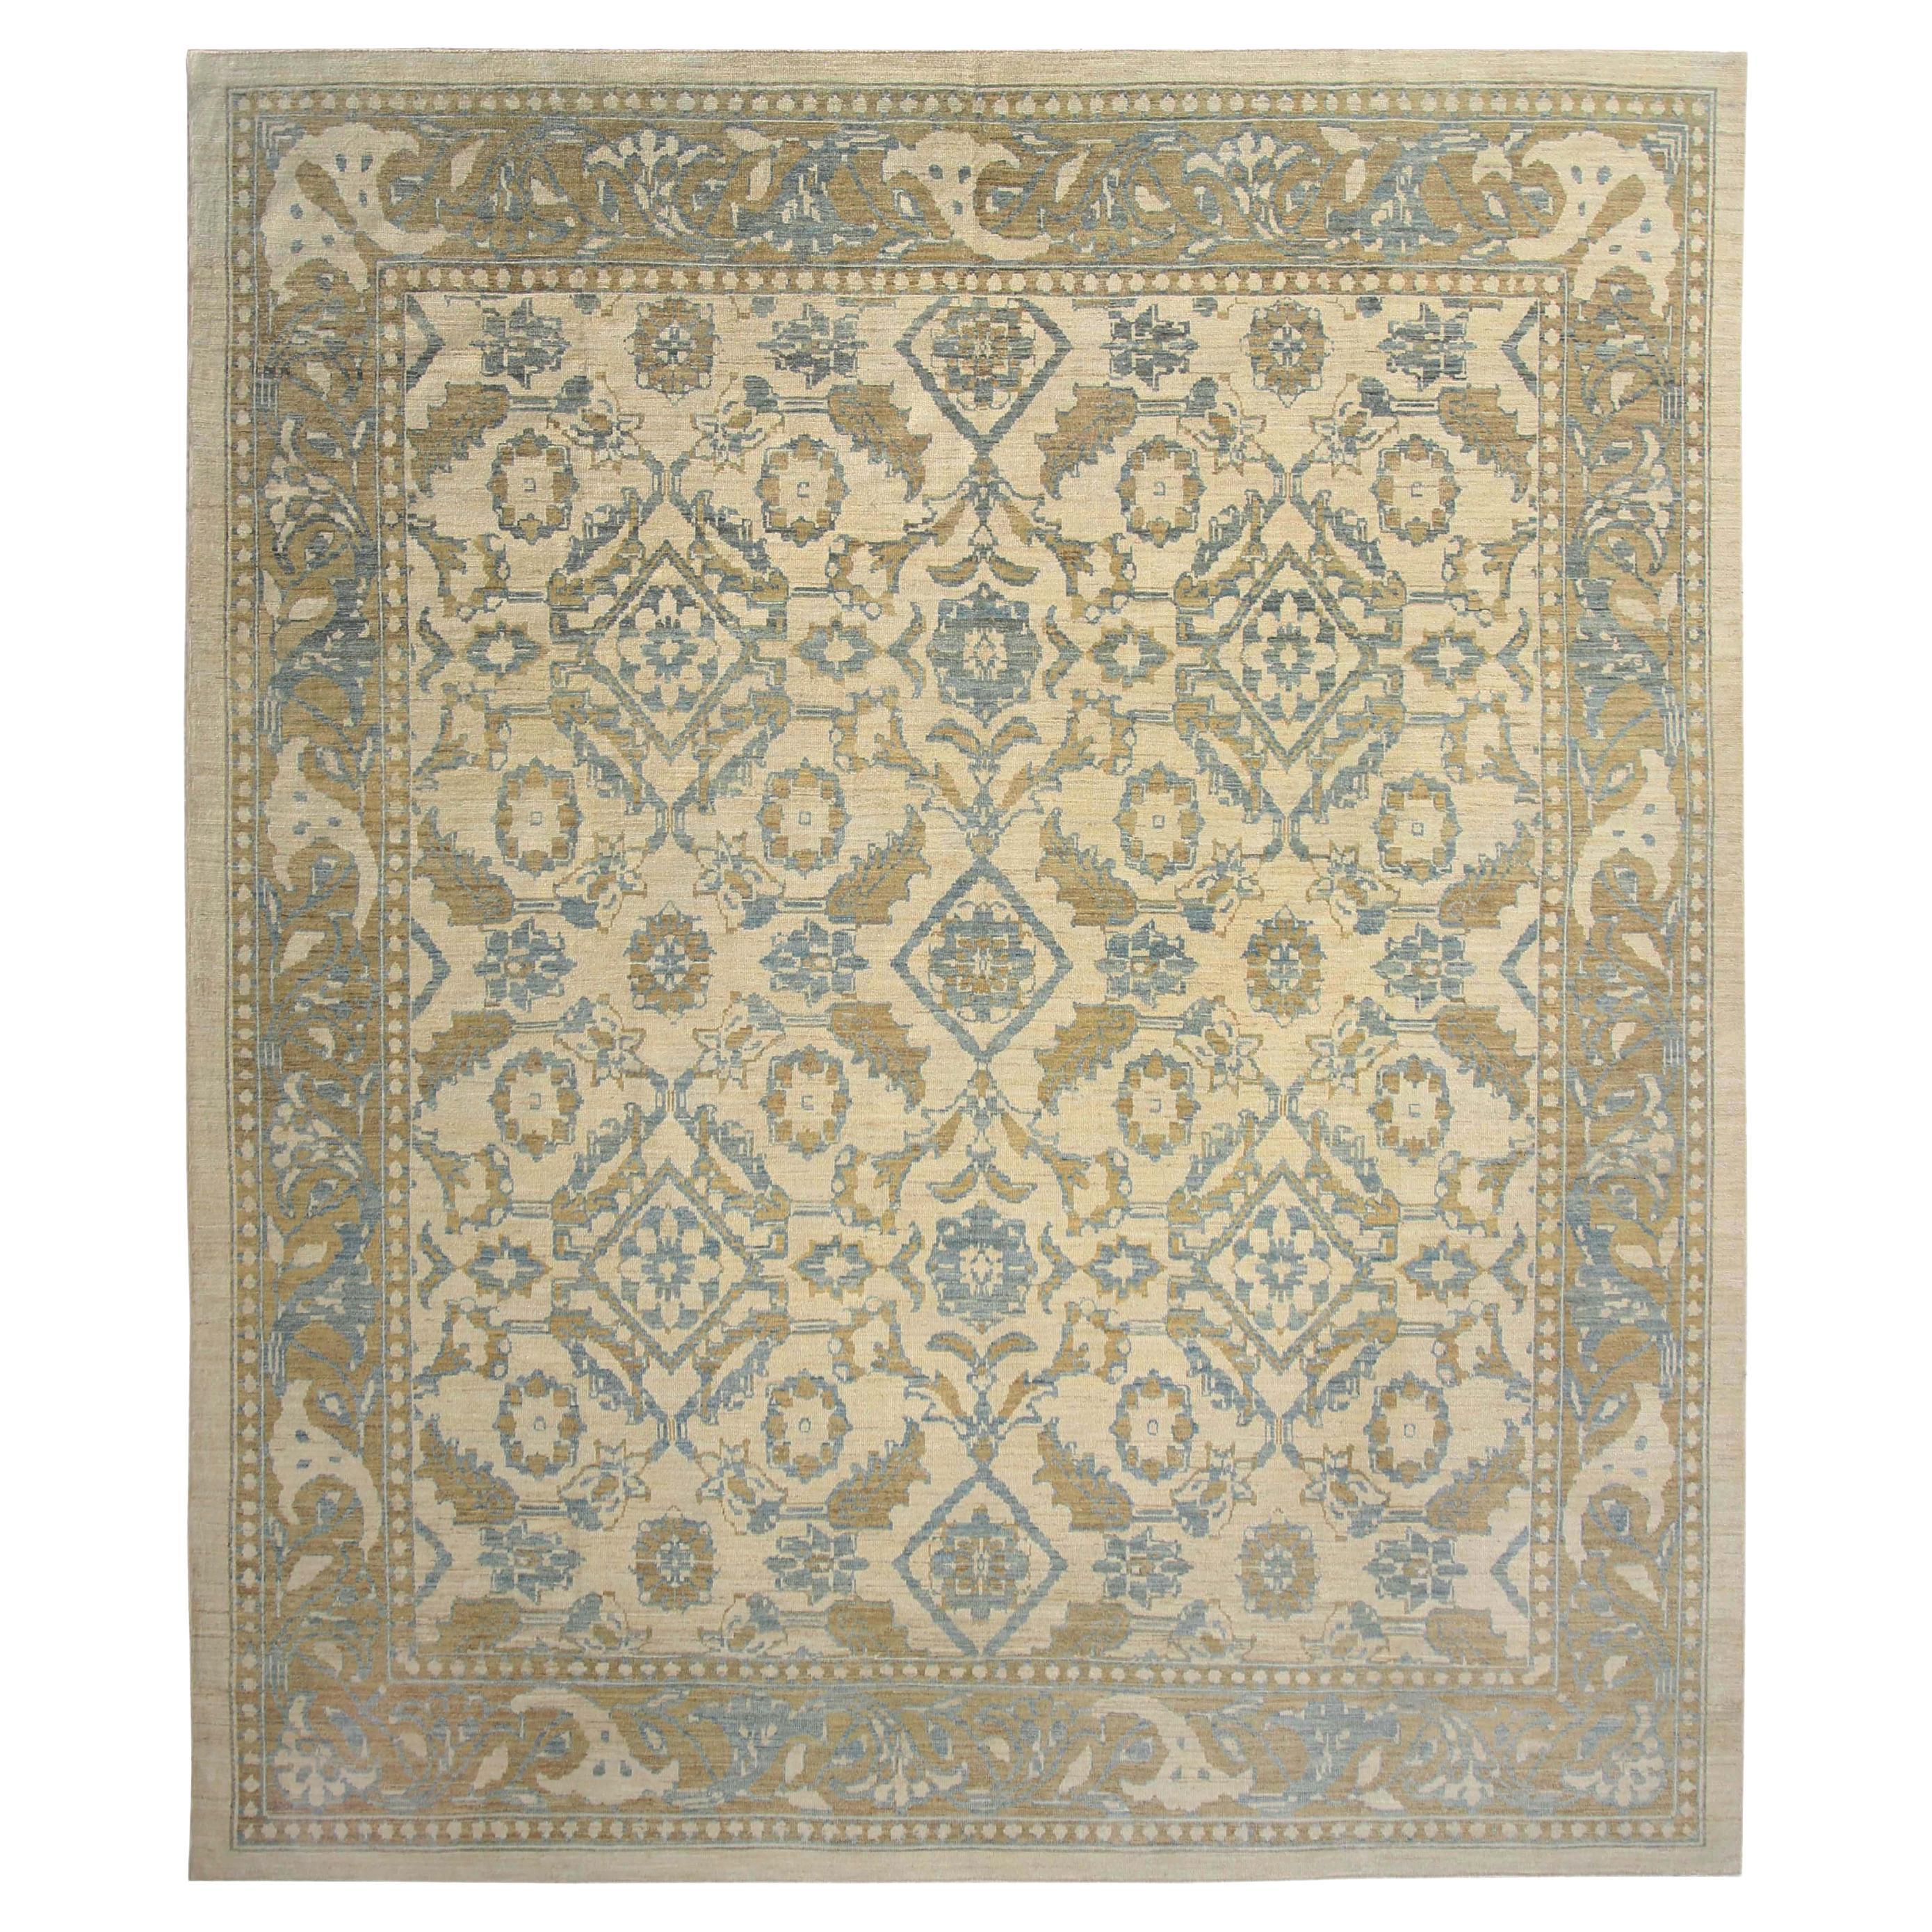 Luxurious Handmade Sultanabad Rug - Transitional Design, Blue, Green, and Yellow For Sale